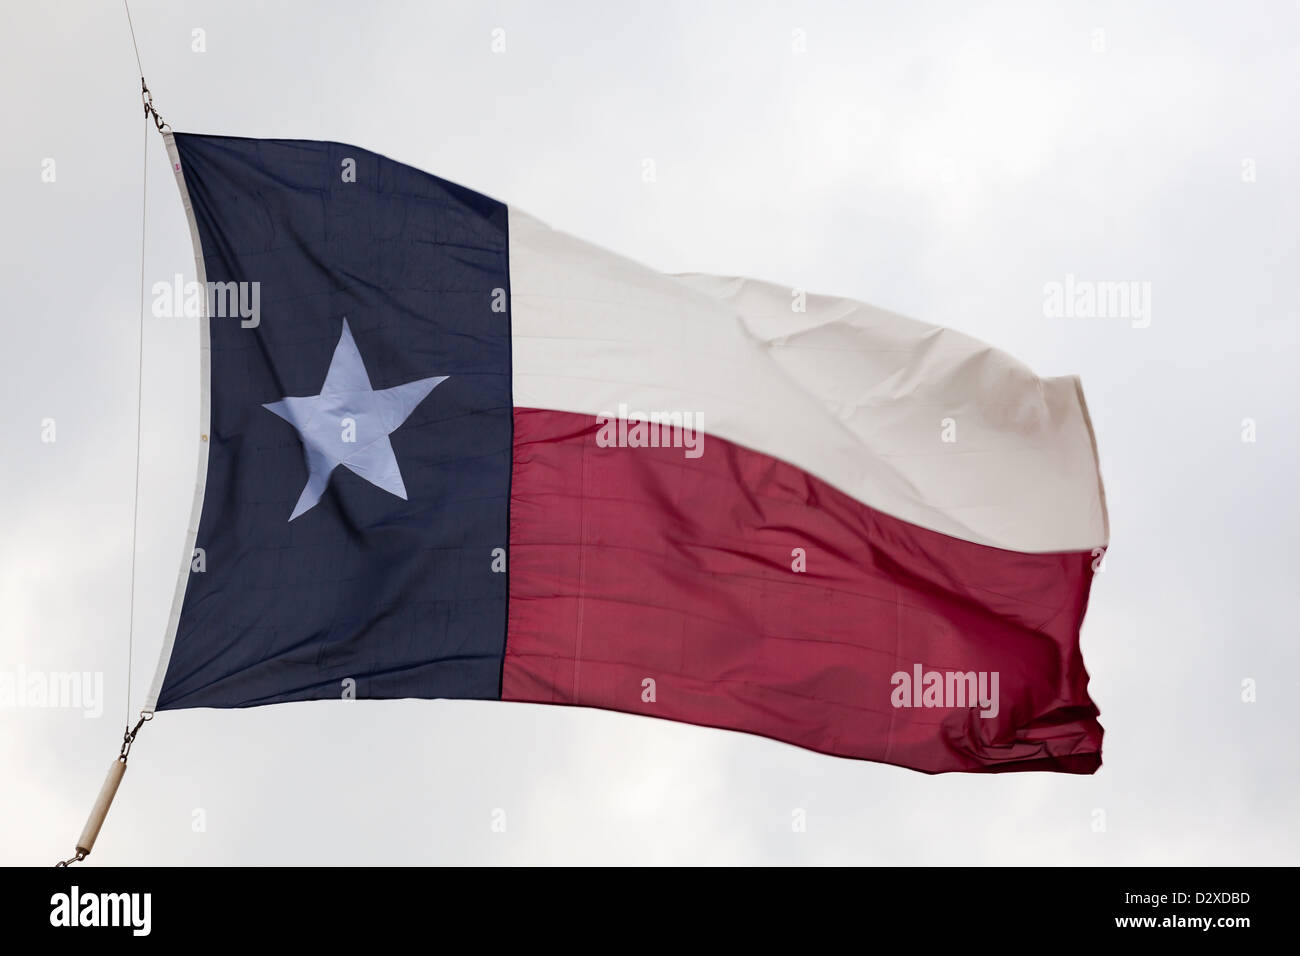 The flag of the State Of Texas, U.S.A. flowing in the wind. Stock Photo